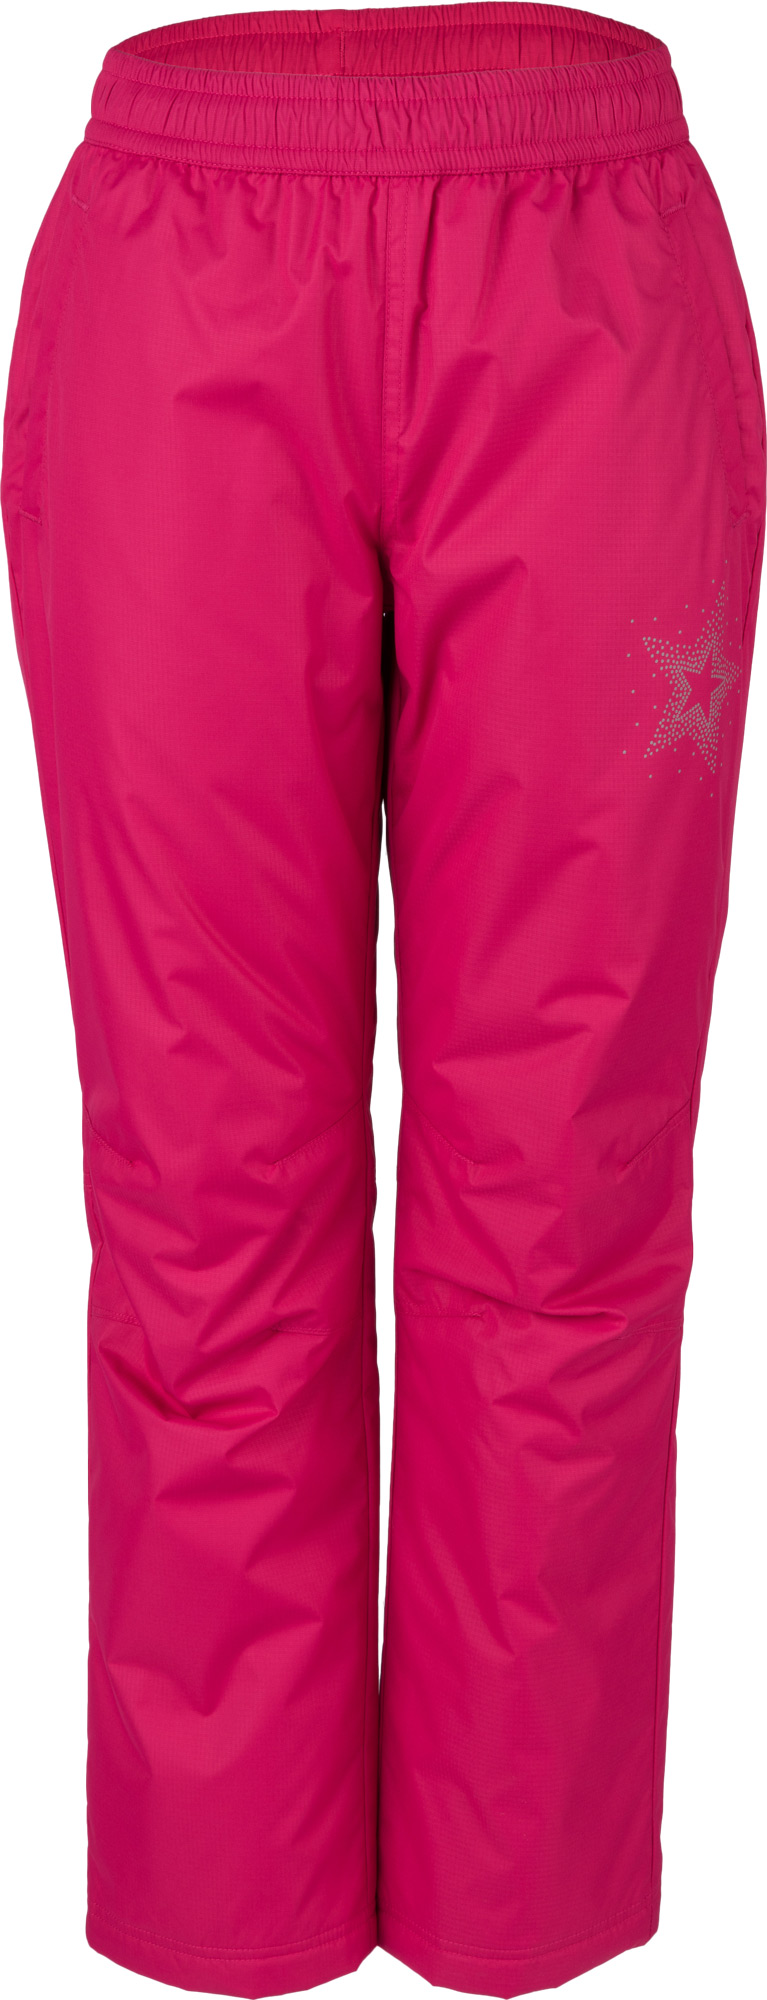 Insulated children’s pants